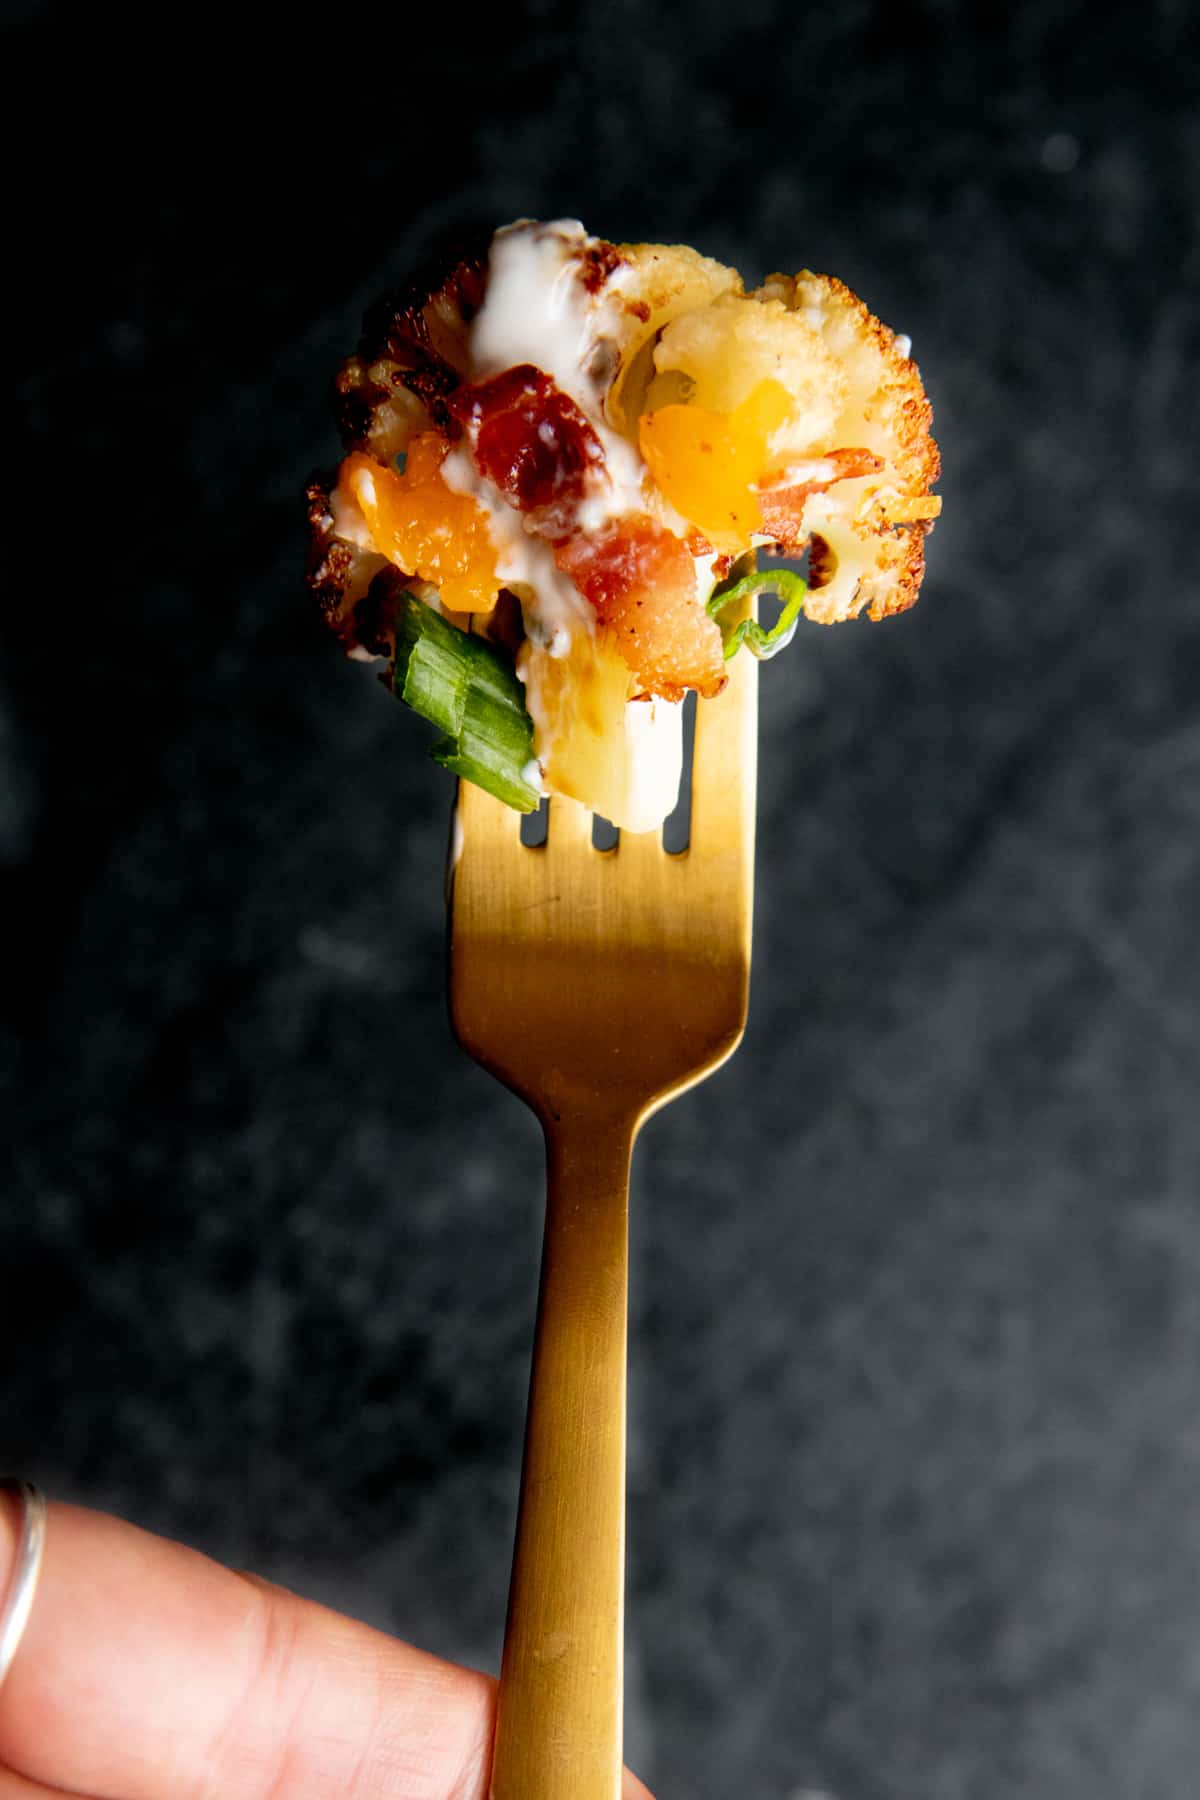 A gold fork holds a bite of loaded roasted cauliflower in front of a dark background.